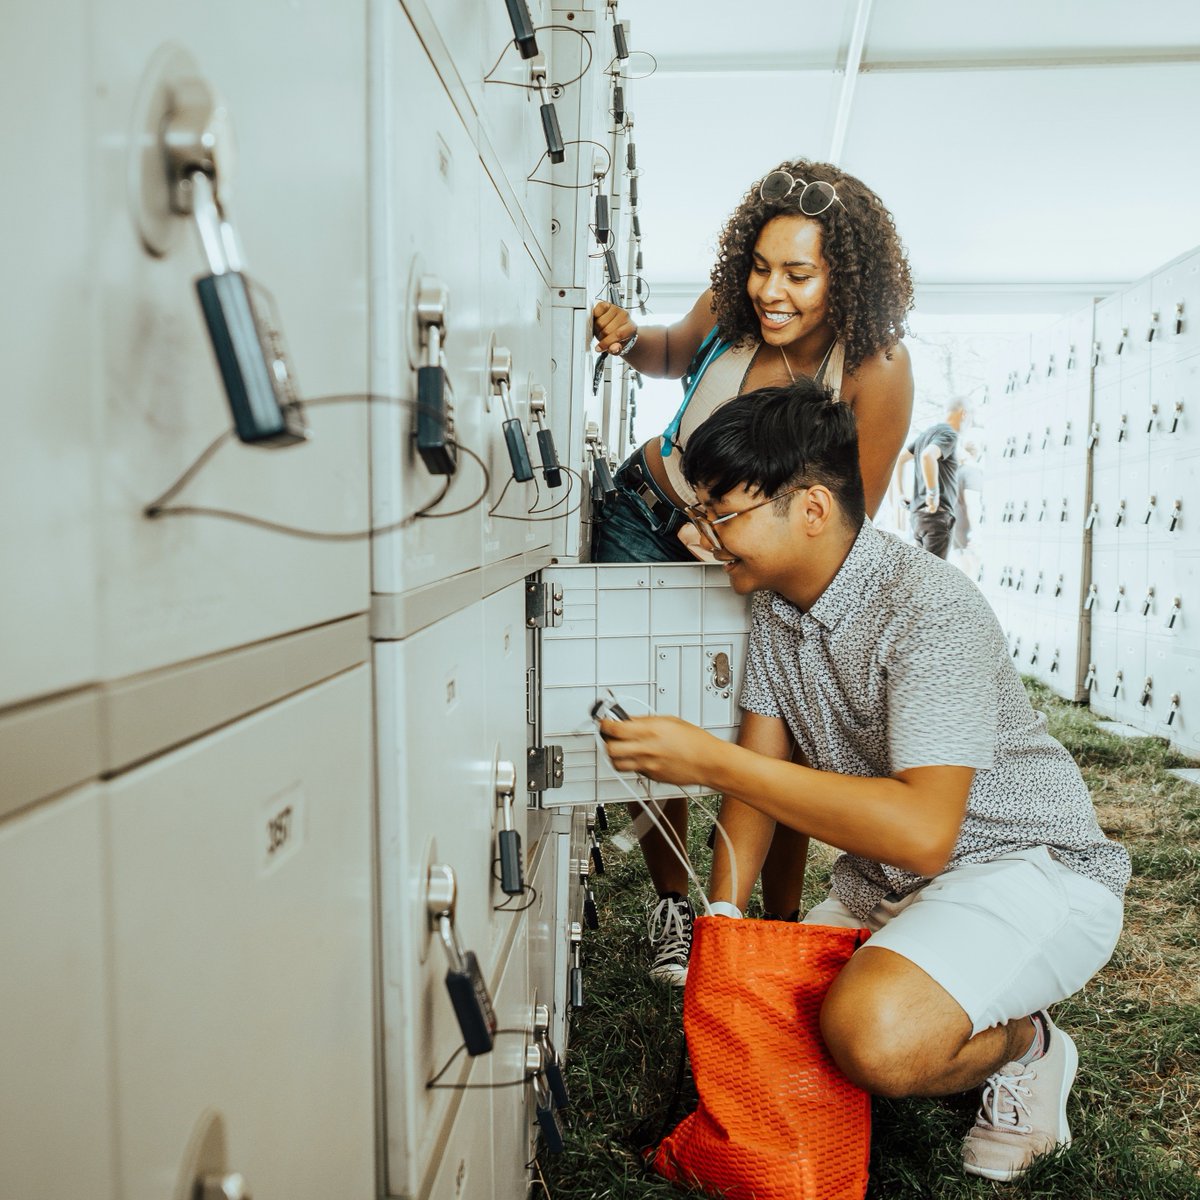 free up your hands & reserve a locker in centeroo! you will have unlimited access to your locker during festival hours & if you rent a multi-day locker, you can leave items in it overnight 😎 bit.ly/4aGM8mF